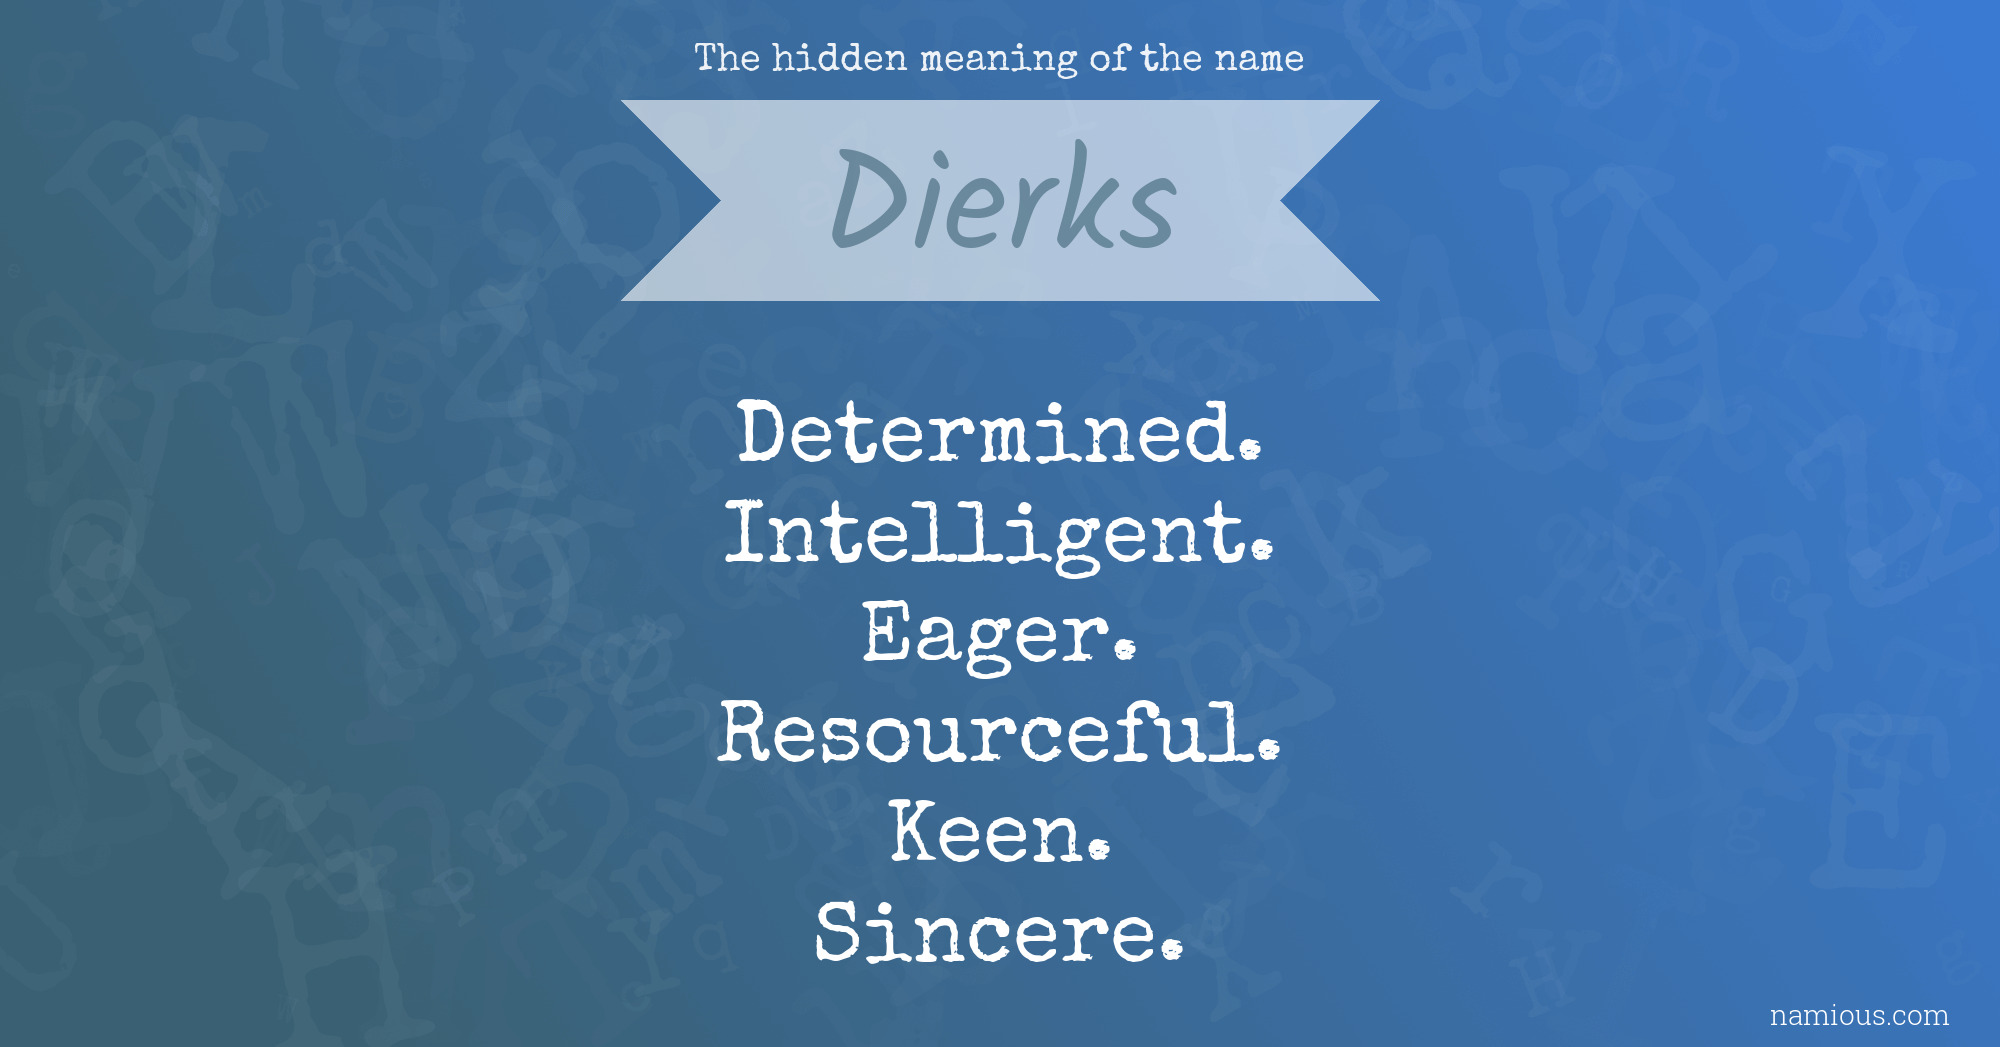 The hidden meaning of the name Dierks